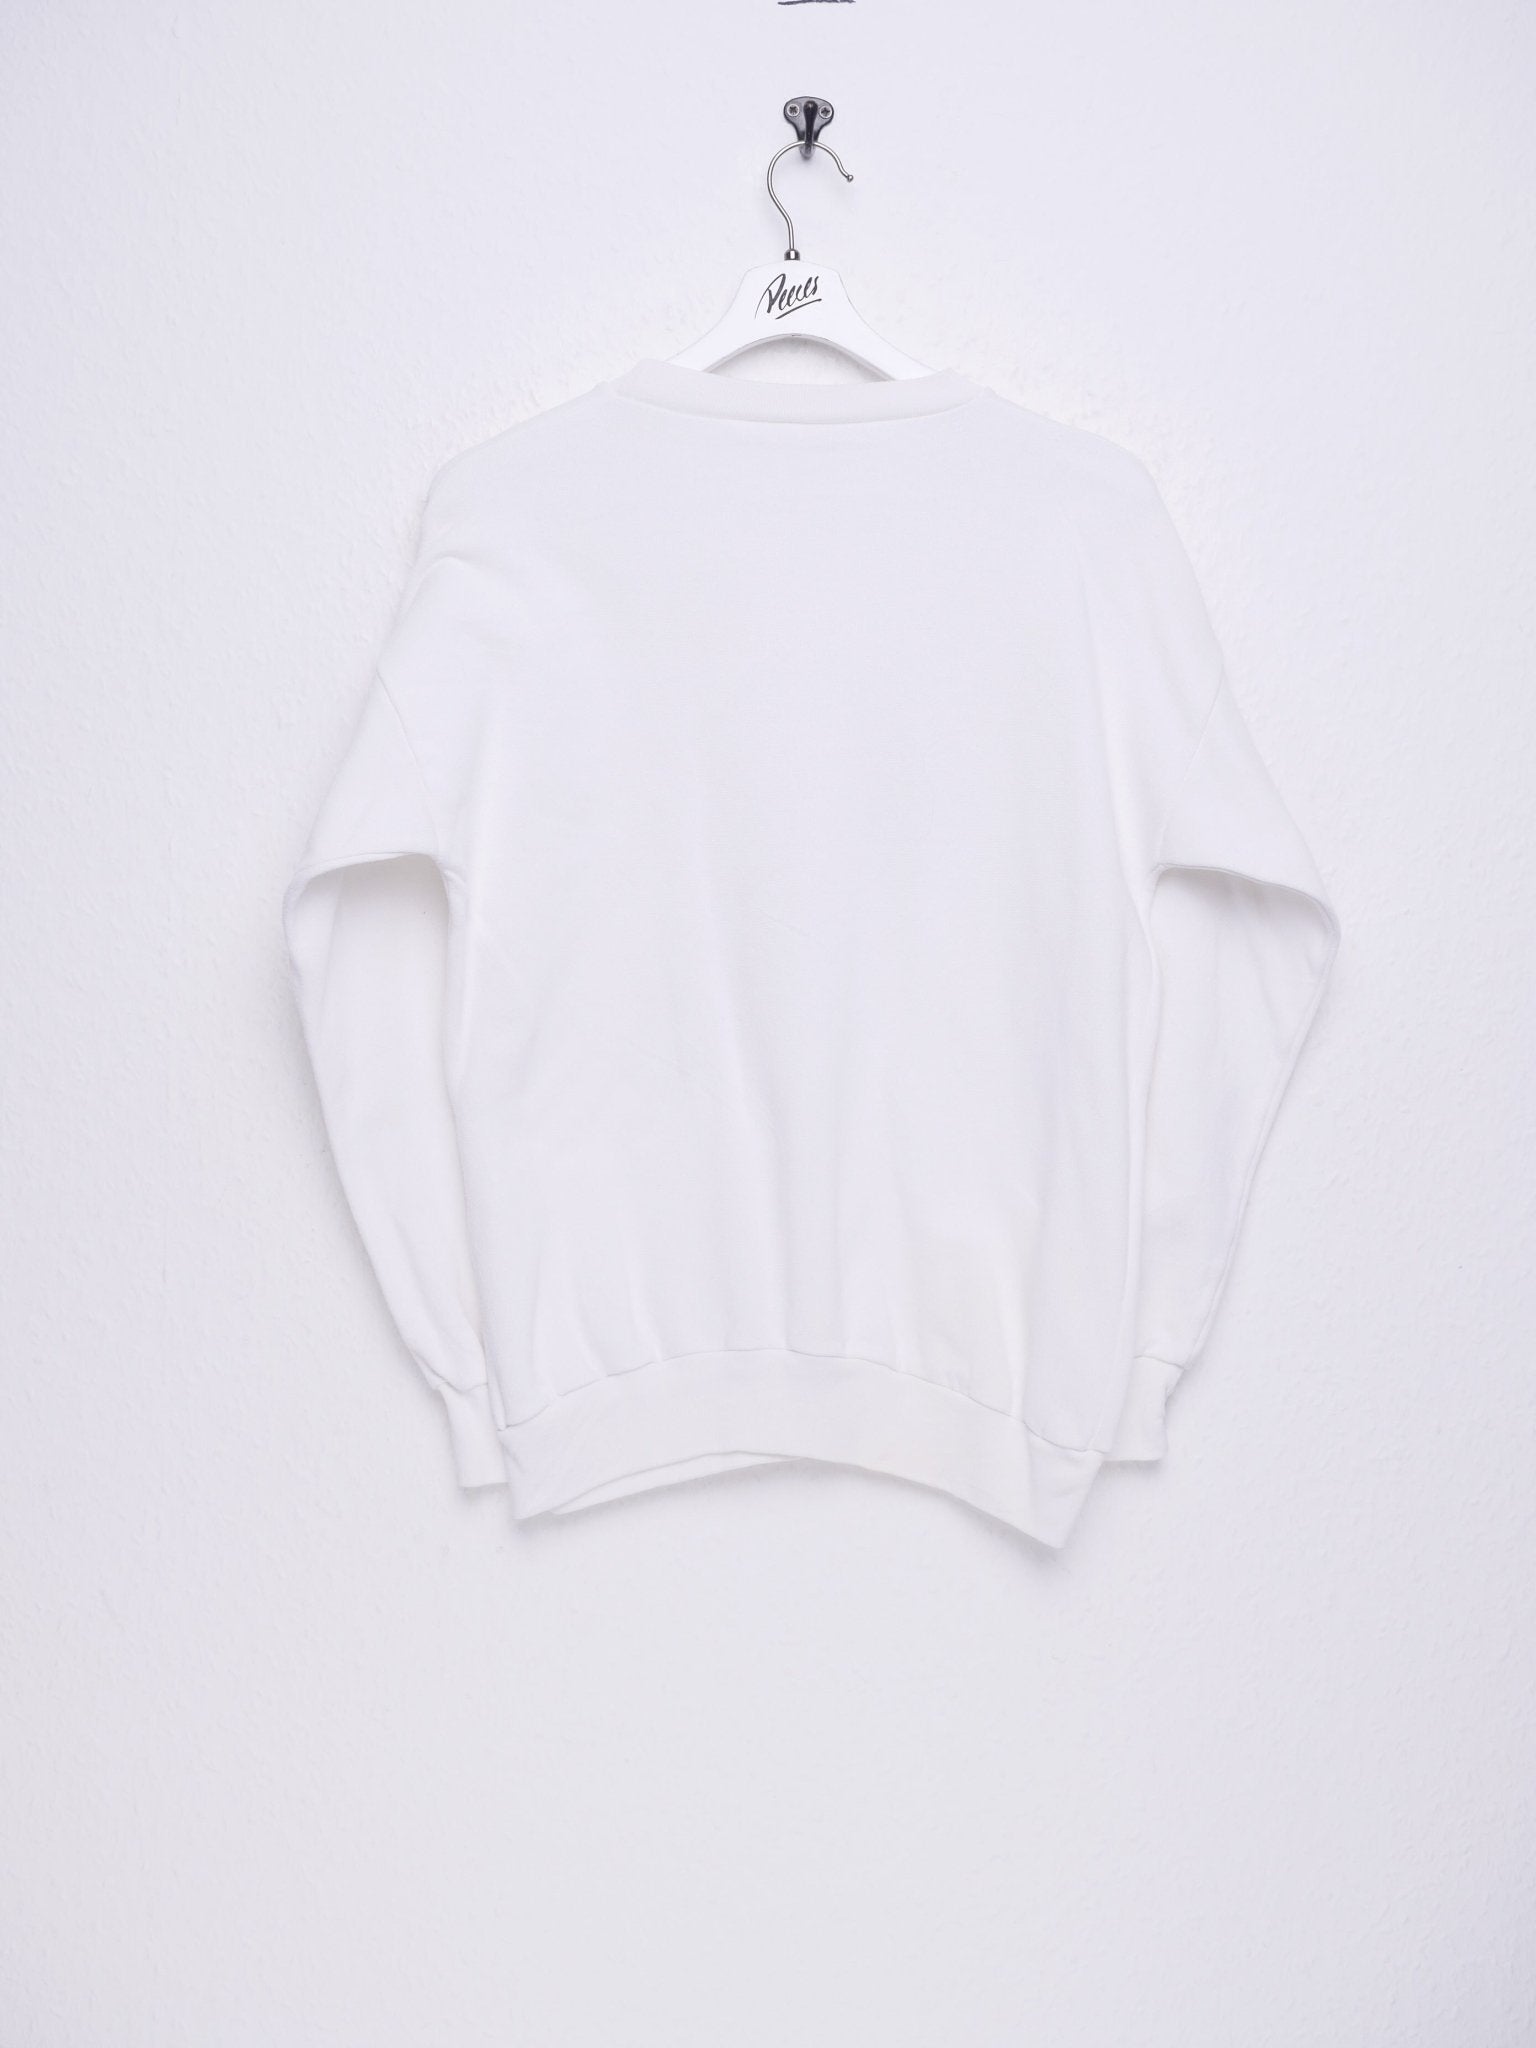 printed Graphic white Vintage Sweater - Peeces